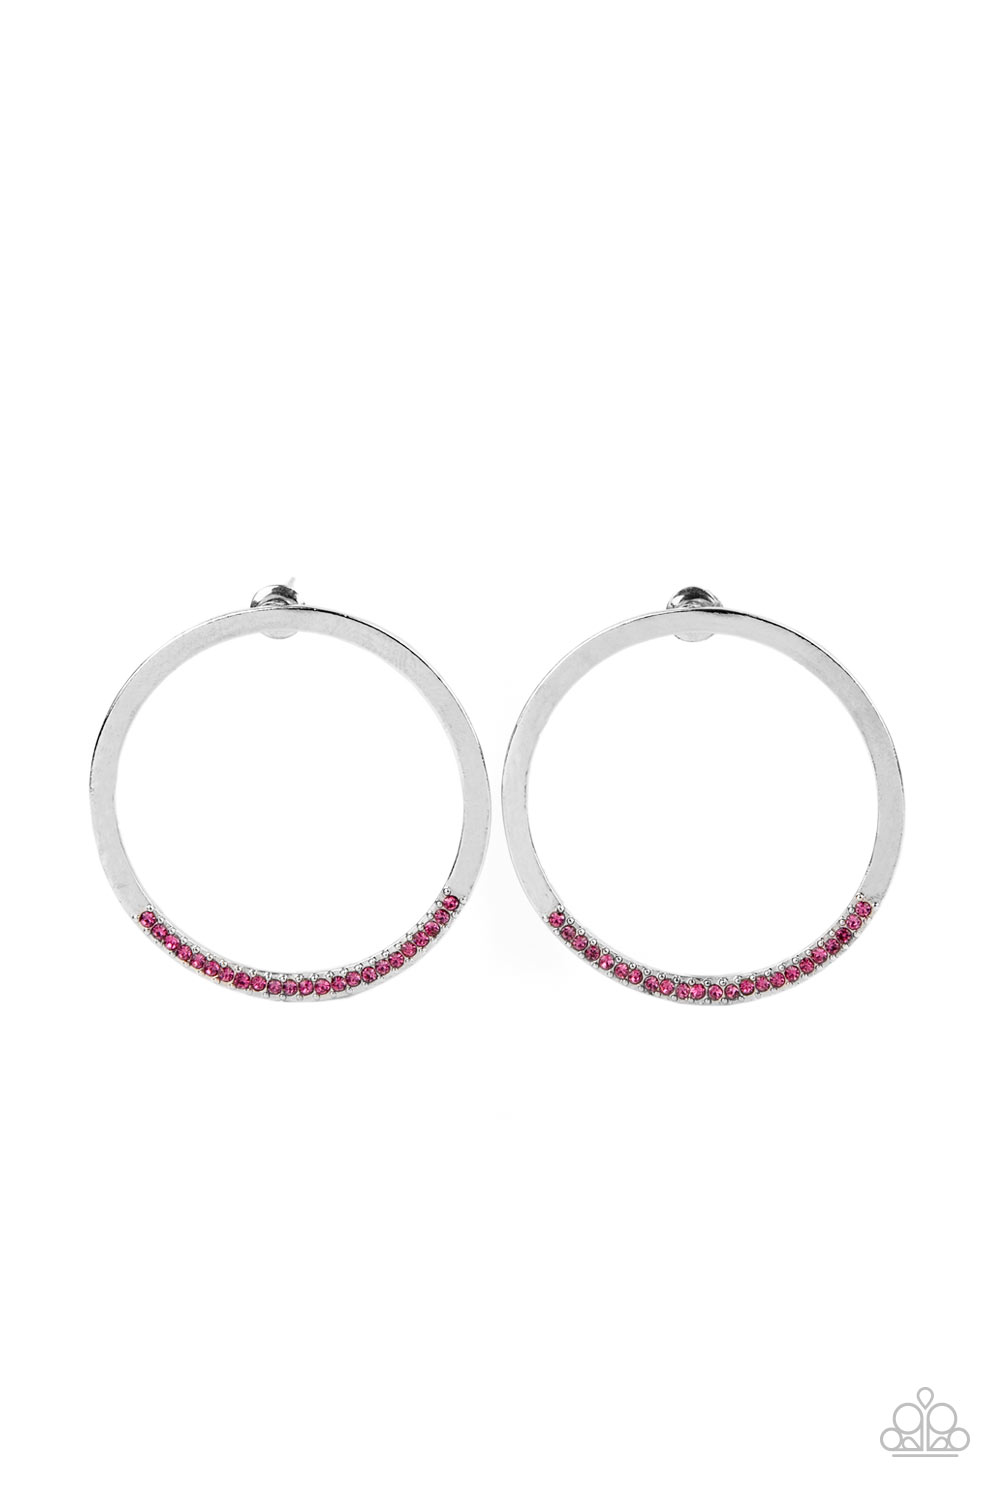 As if dipped in glitter, the bottom of a flat silver hoop is encrusted in dainty pink rhinestones for a classic shimmer. Earring attaches to a standard post fitting.  Sold as one pair of post earrings.